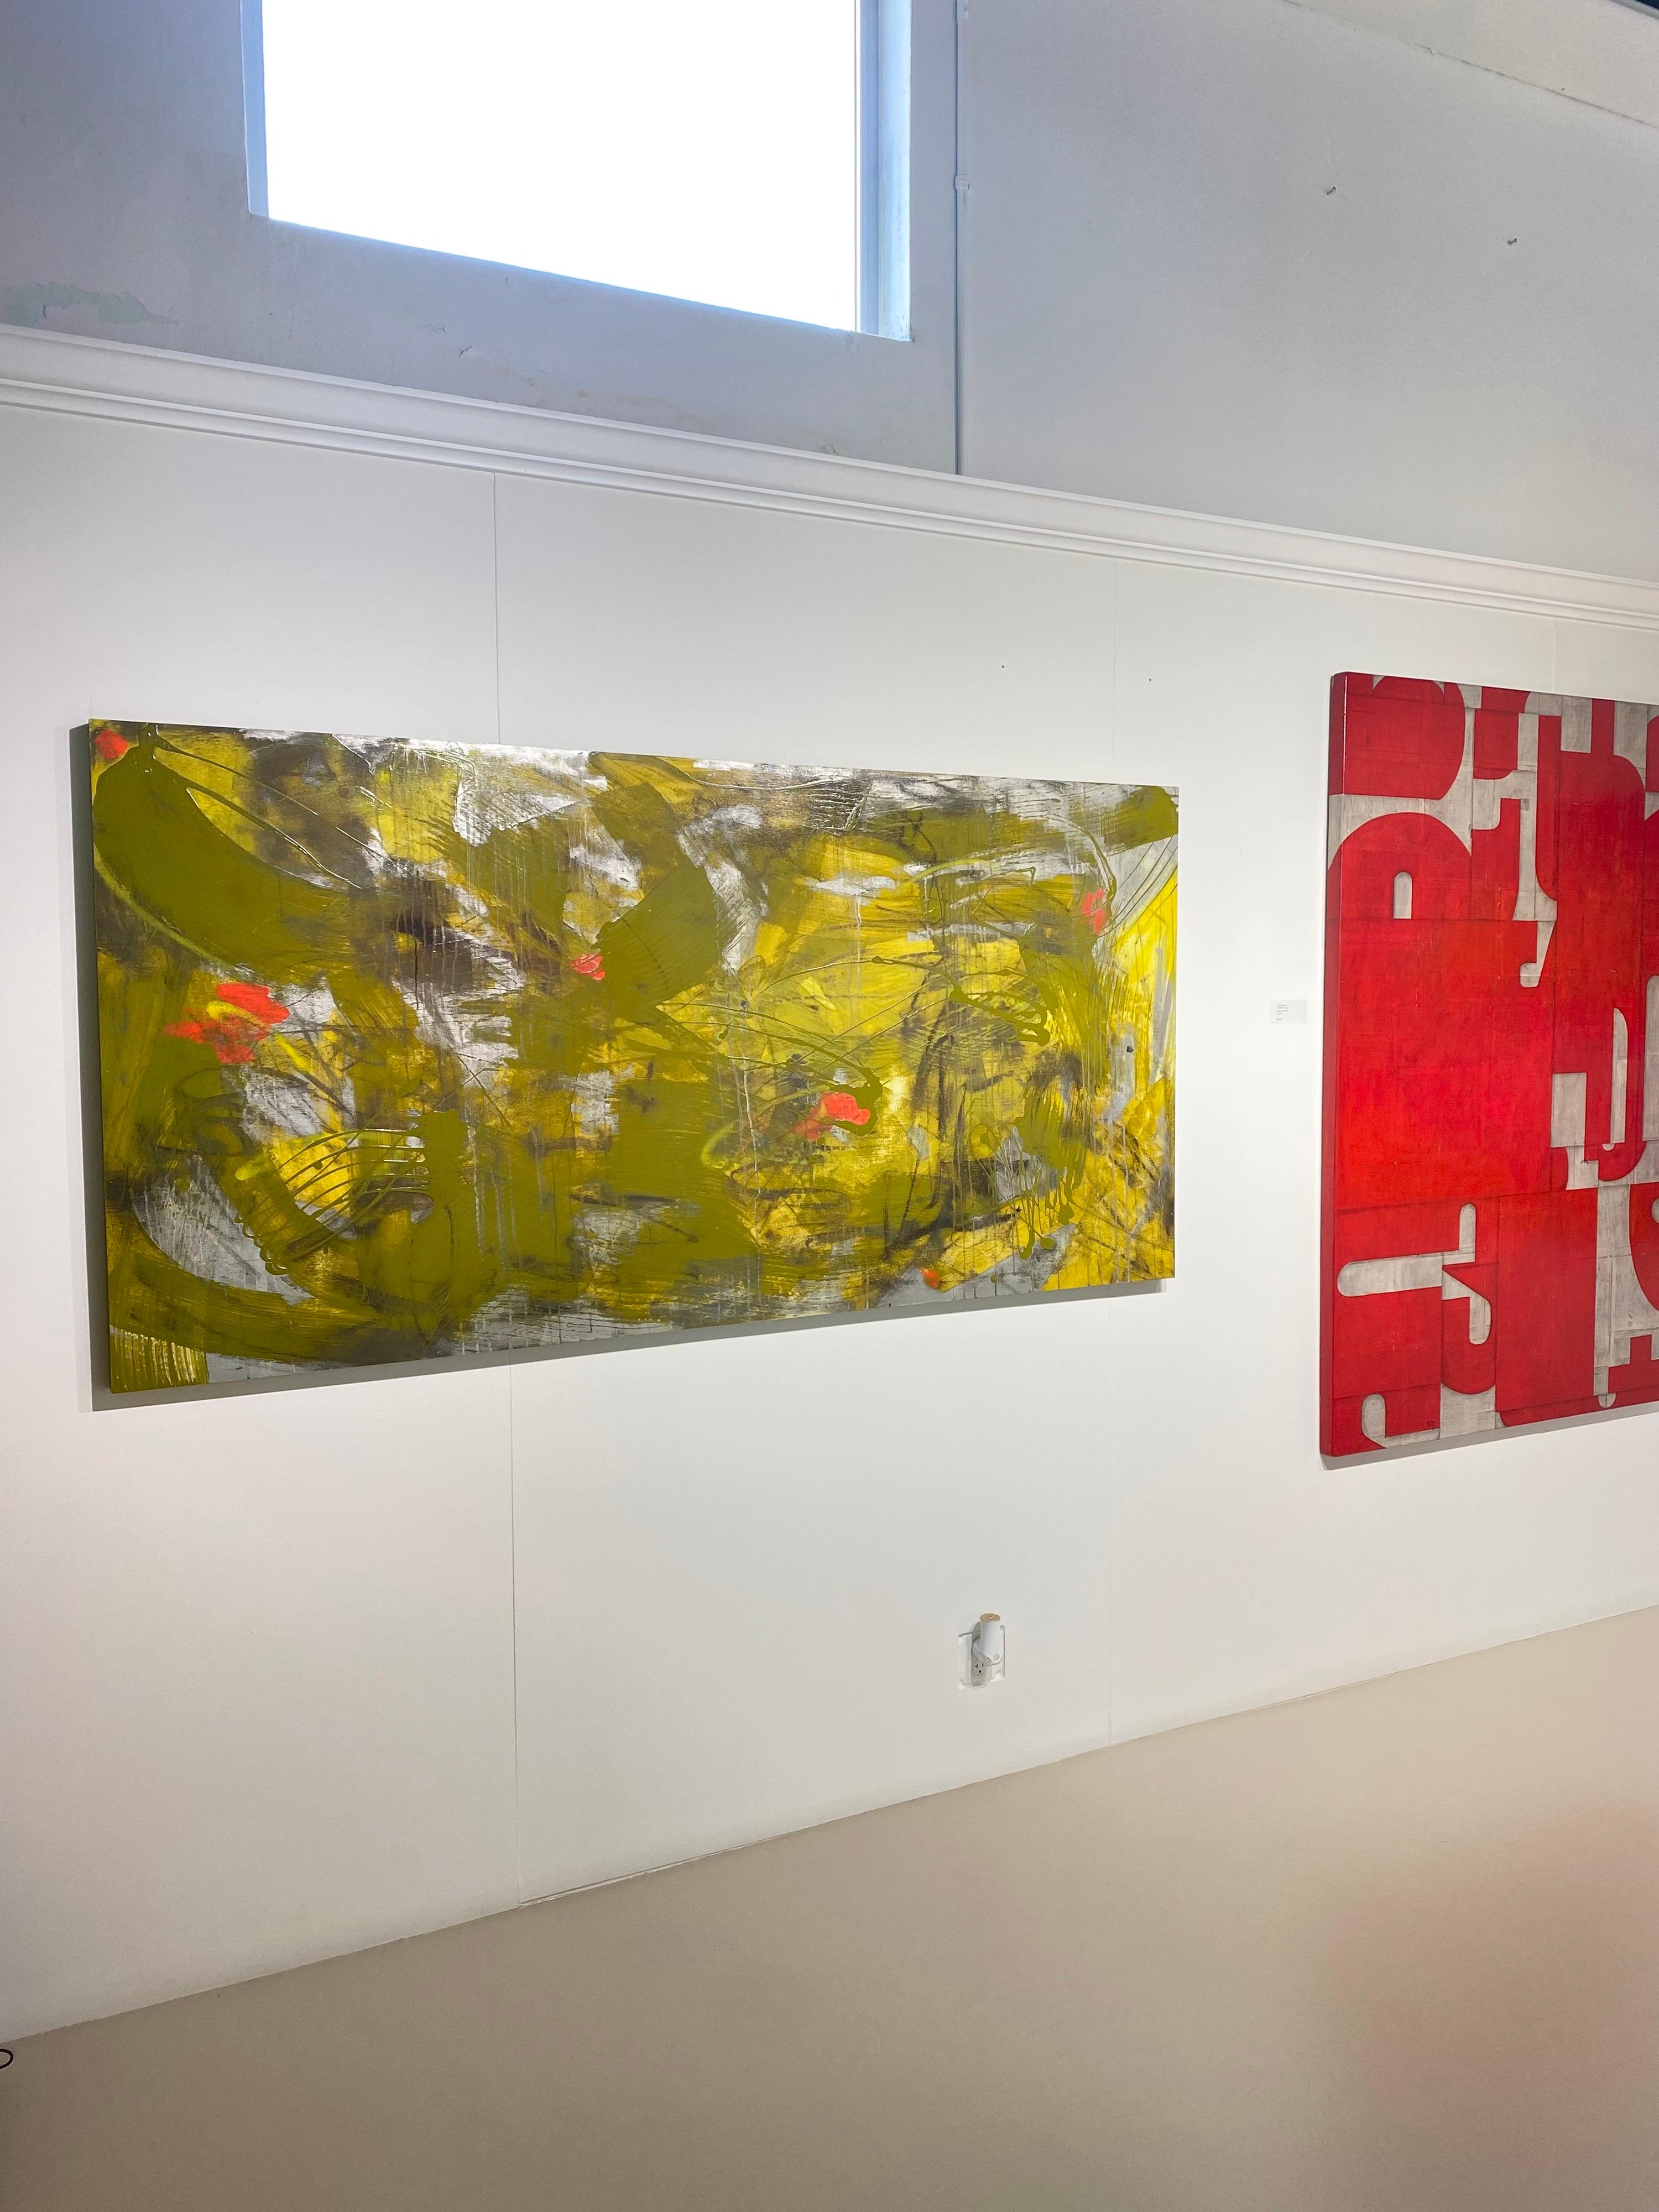 Born in Havana, Cuba, in the late 70s during a well-documented time of religious and political oppression, abstract expressionist artist Mirtha Moreno, immigrated to the United States as a child in 1980. Raised in South Florida amongst a growing